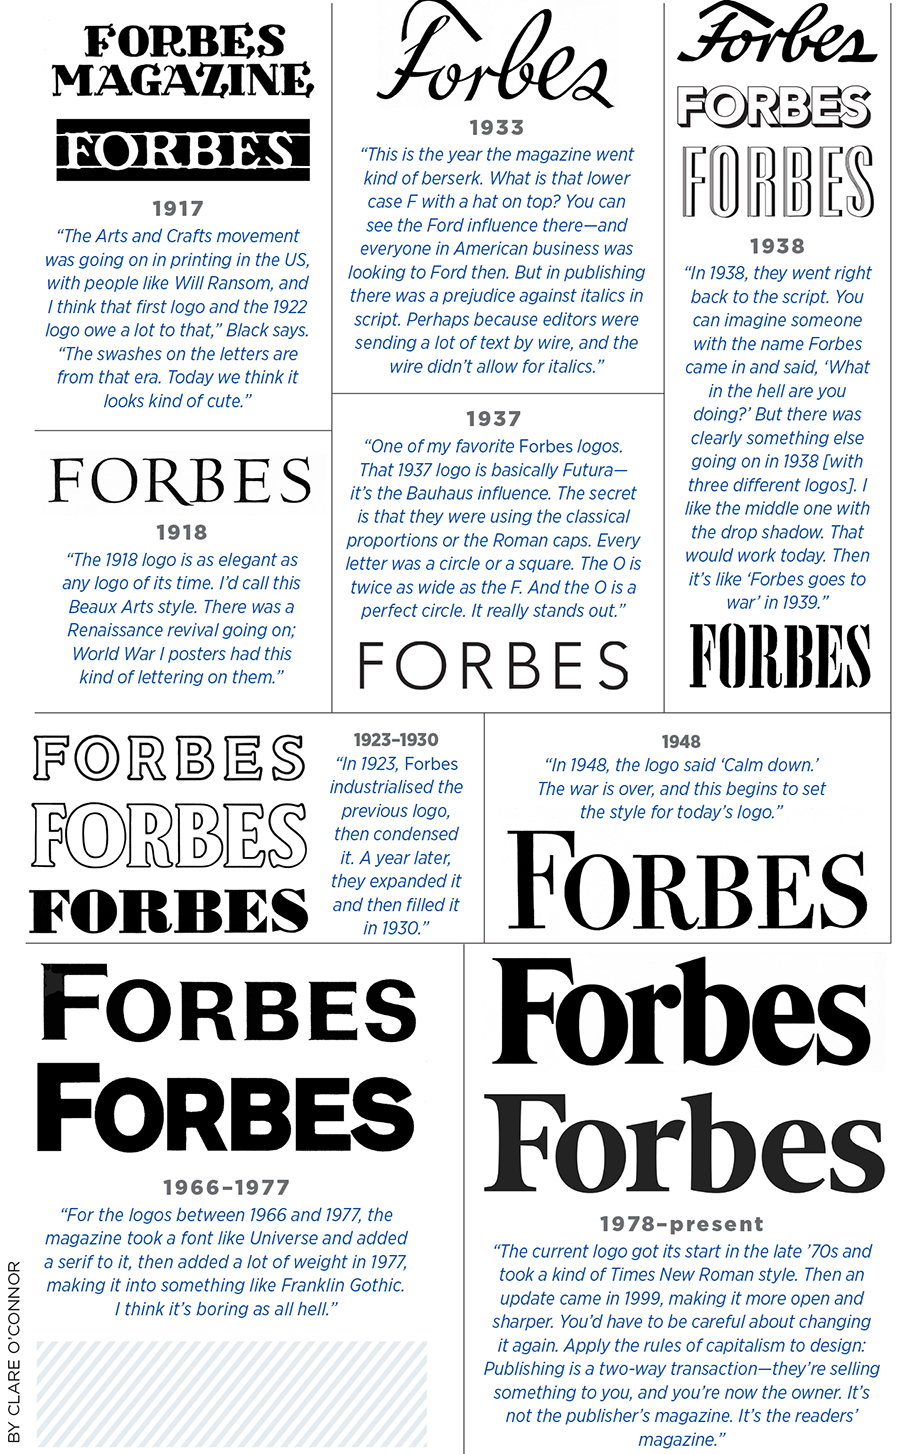 Forbes image